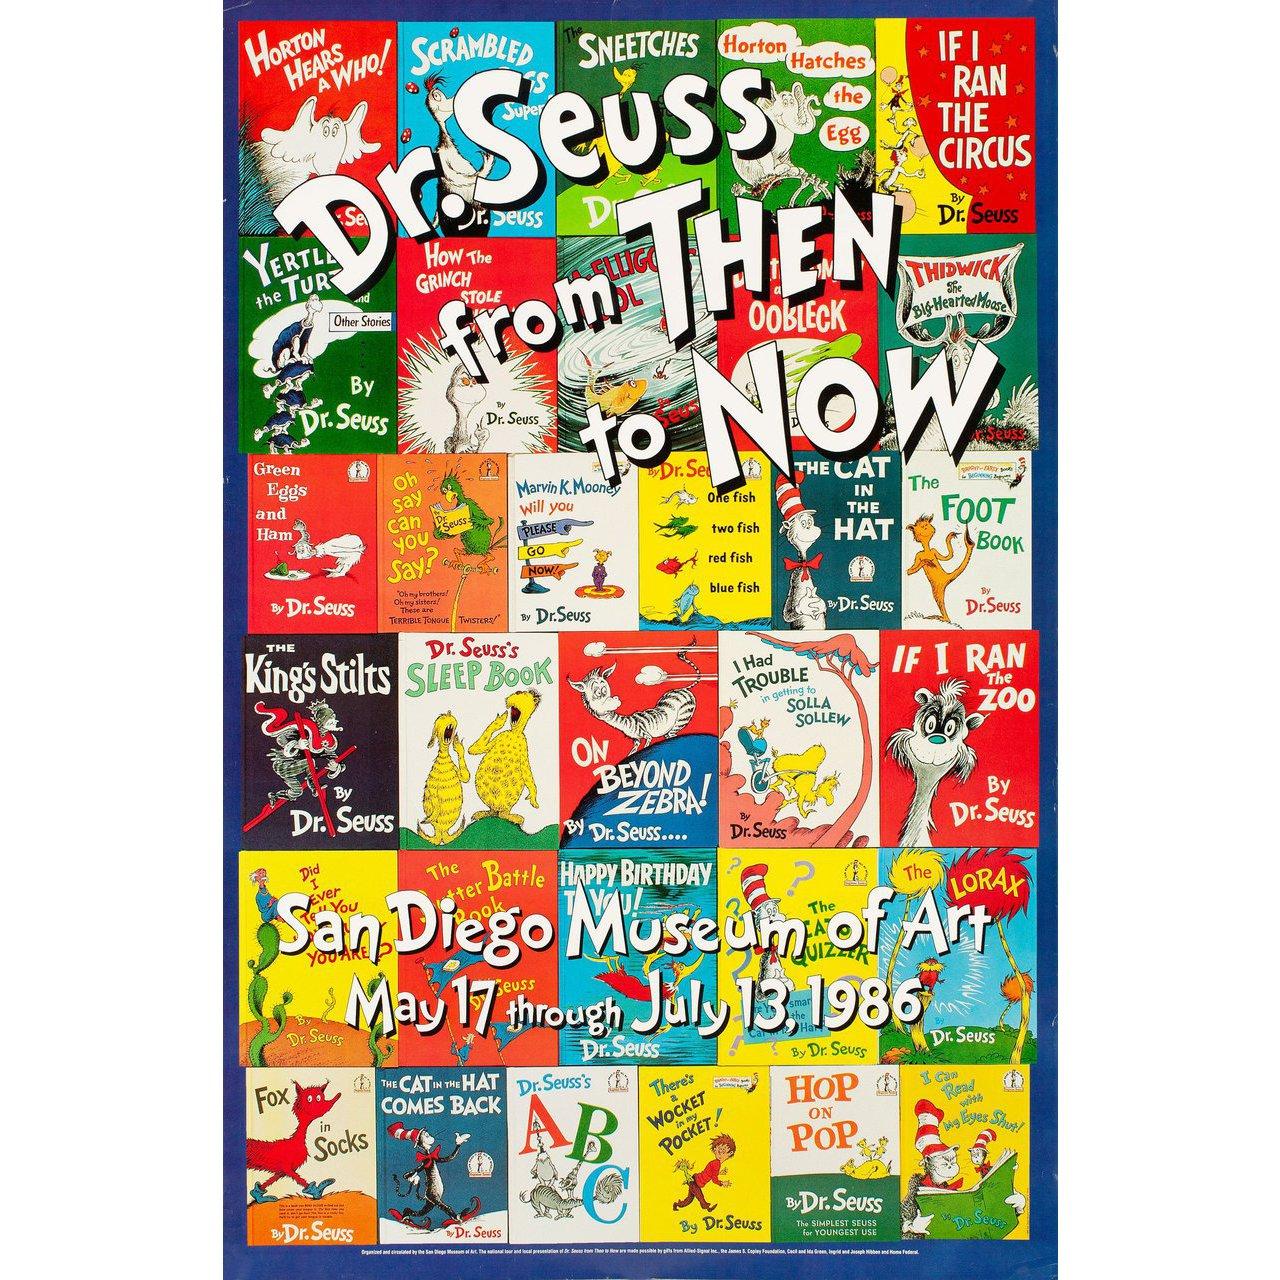 American Dr. Seuss from Then to Now 1986 U.S. Exhibition Poster